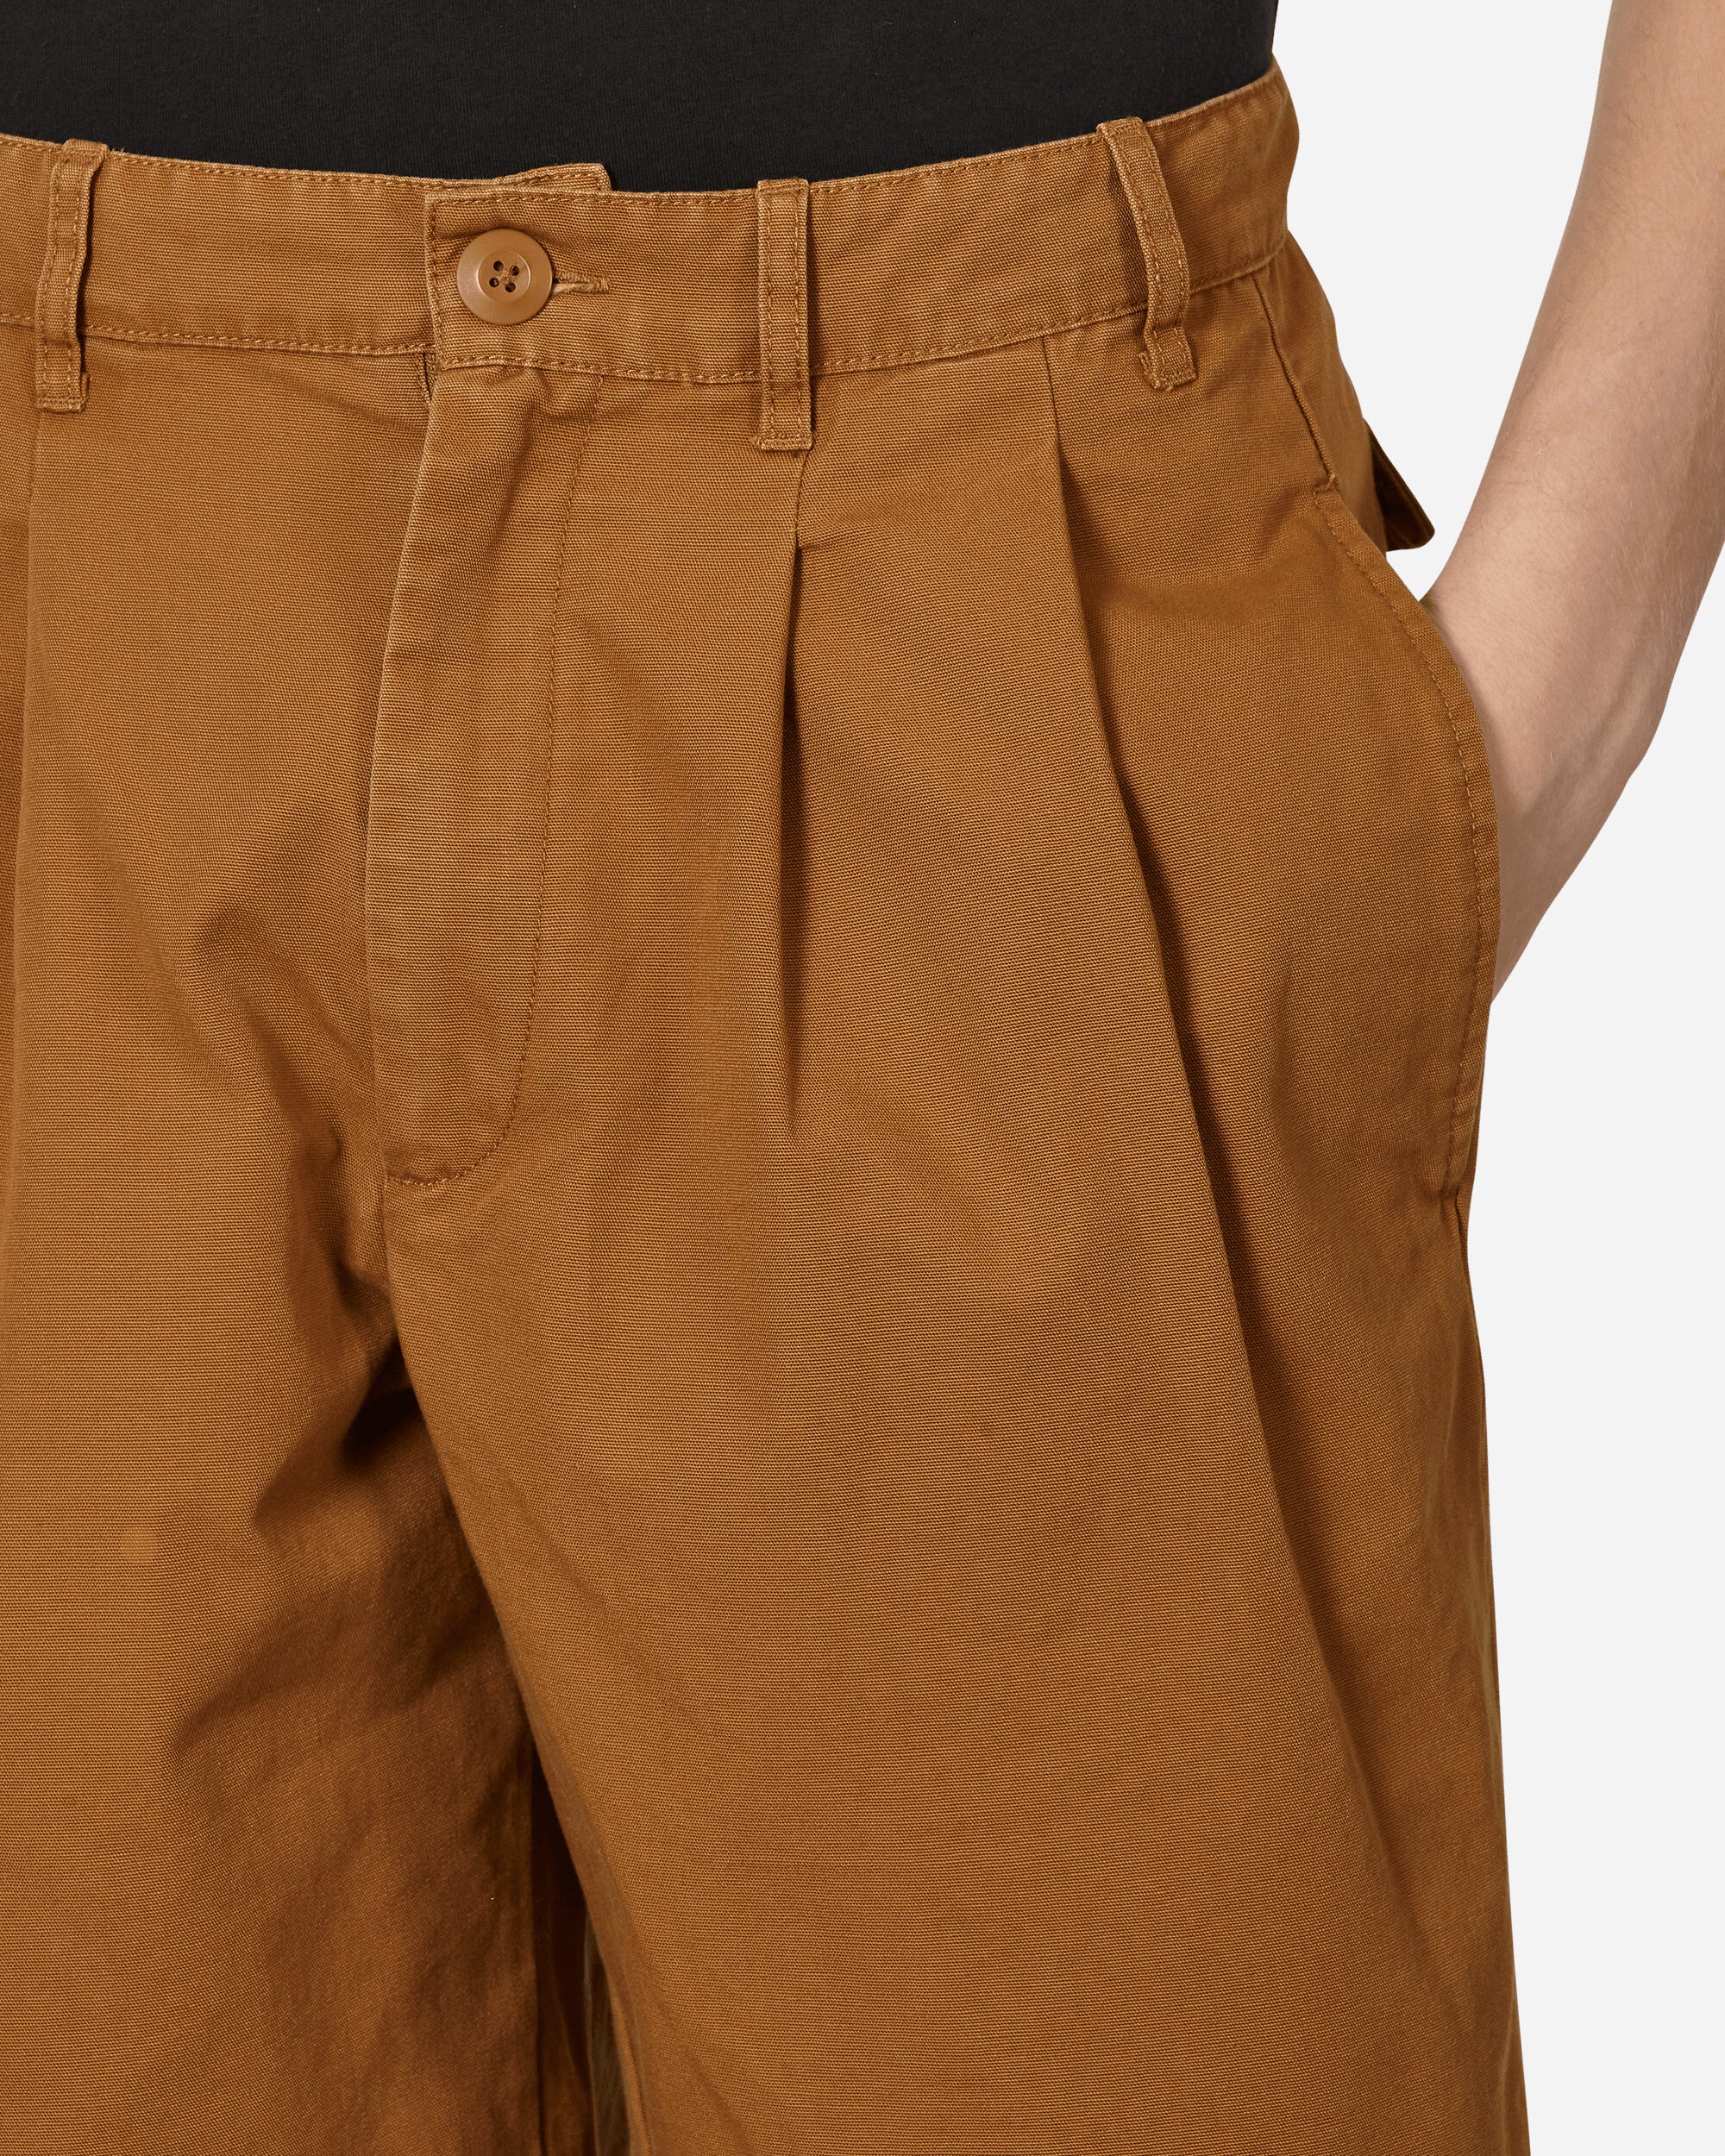 Nike Pleated Chino Short Ale Brown/White Pants Trousers DX0643-270